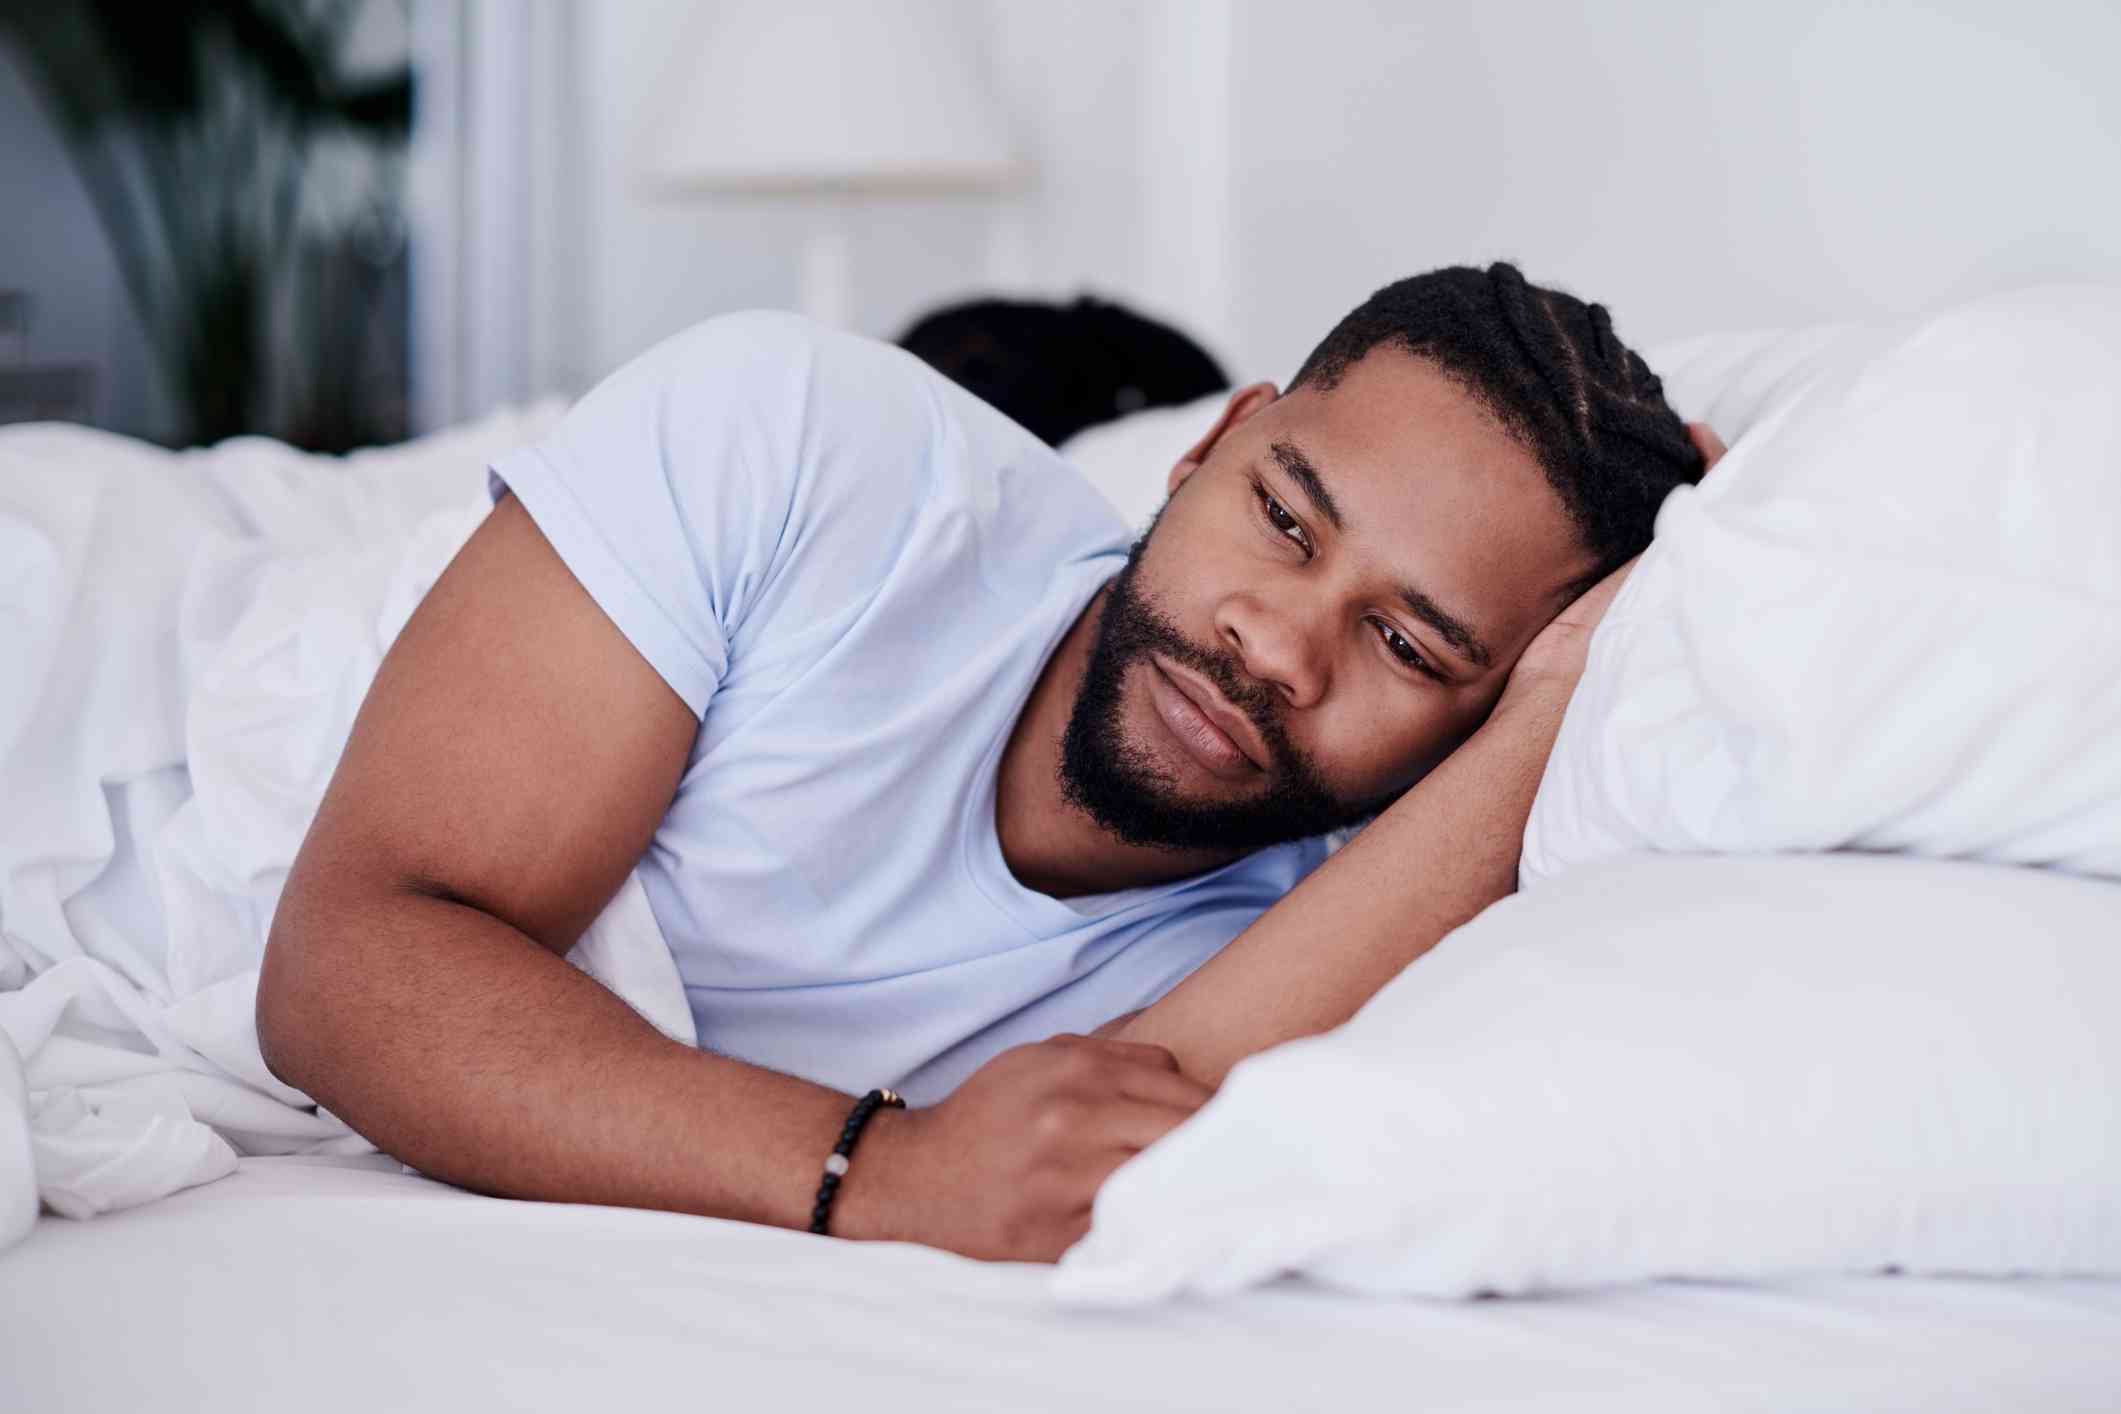 Her: i wonder what he's thinking about Him: their, there and they're all  sound the exact same but all have different meanings - Couple thinking in  bed